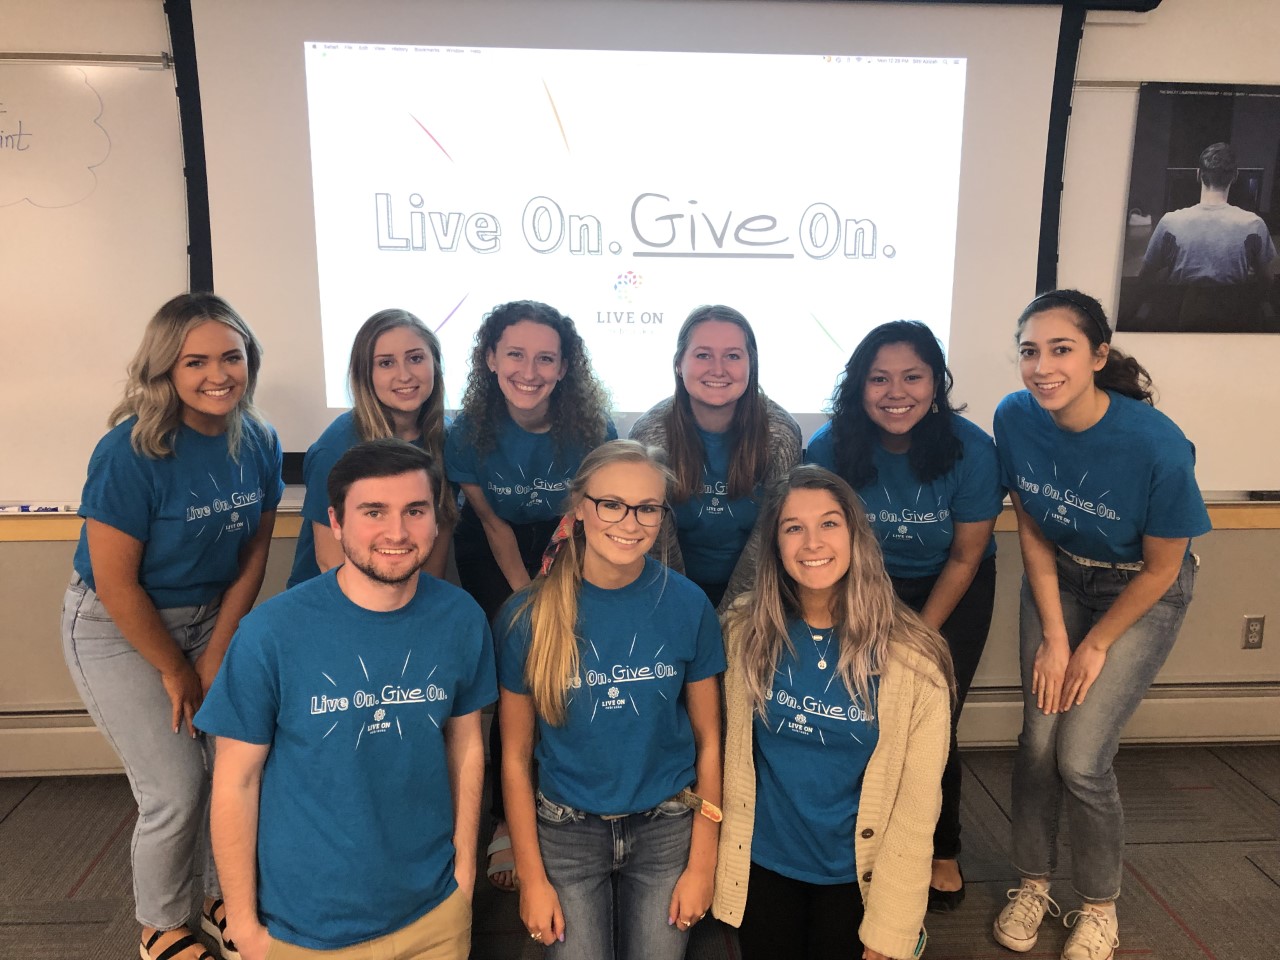 “Live On. Give On.” educated UNL students about how organ donors can give the gift of life while they are still living, as the majority of people on the national transplant waiting list need kidney transplants. 